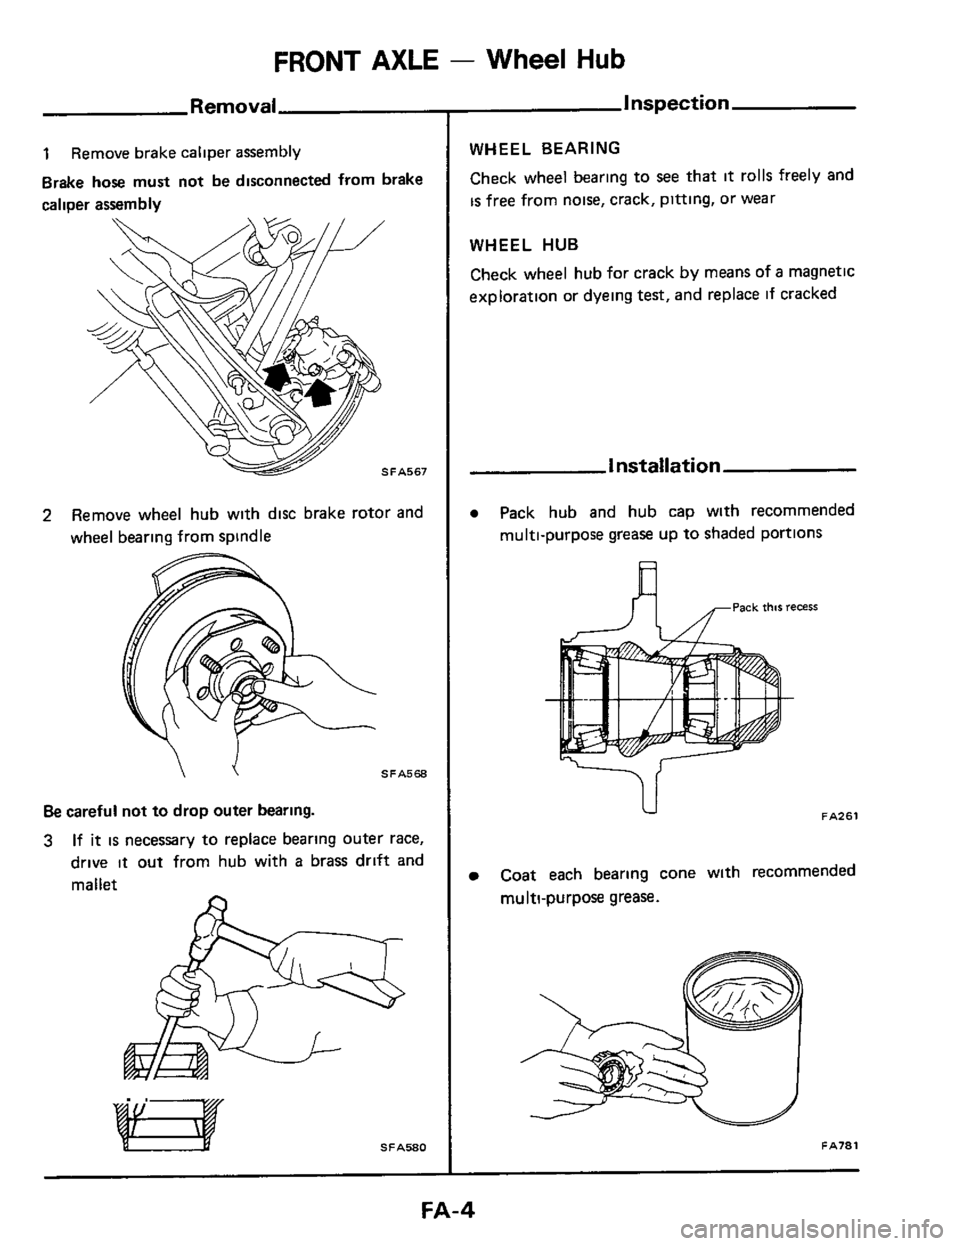 NISSAN 300ZX 1984 Z31 Front Suspension Workshop Manual FRONT AXLE - Wheel Hub 
Removal 
1 Remove brake caliper  assembly 
Brake 
hose must  not be disconnected  from brake 
caliper  assembly 
2 Remove  wheel hub with  disc brake  rotor and 
wheel  bearing